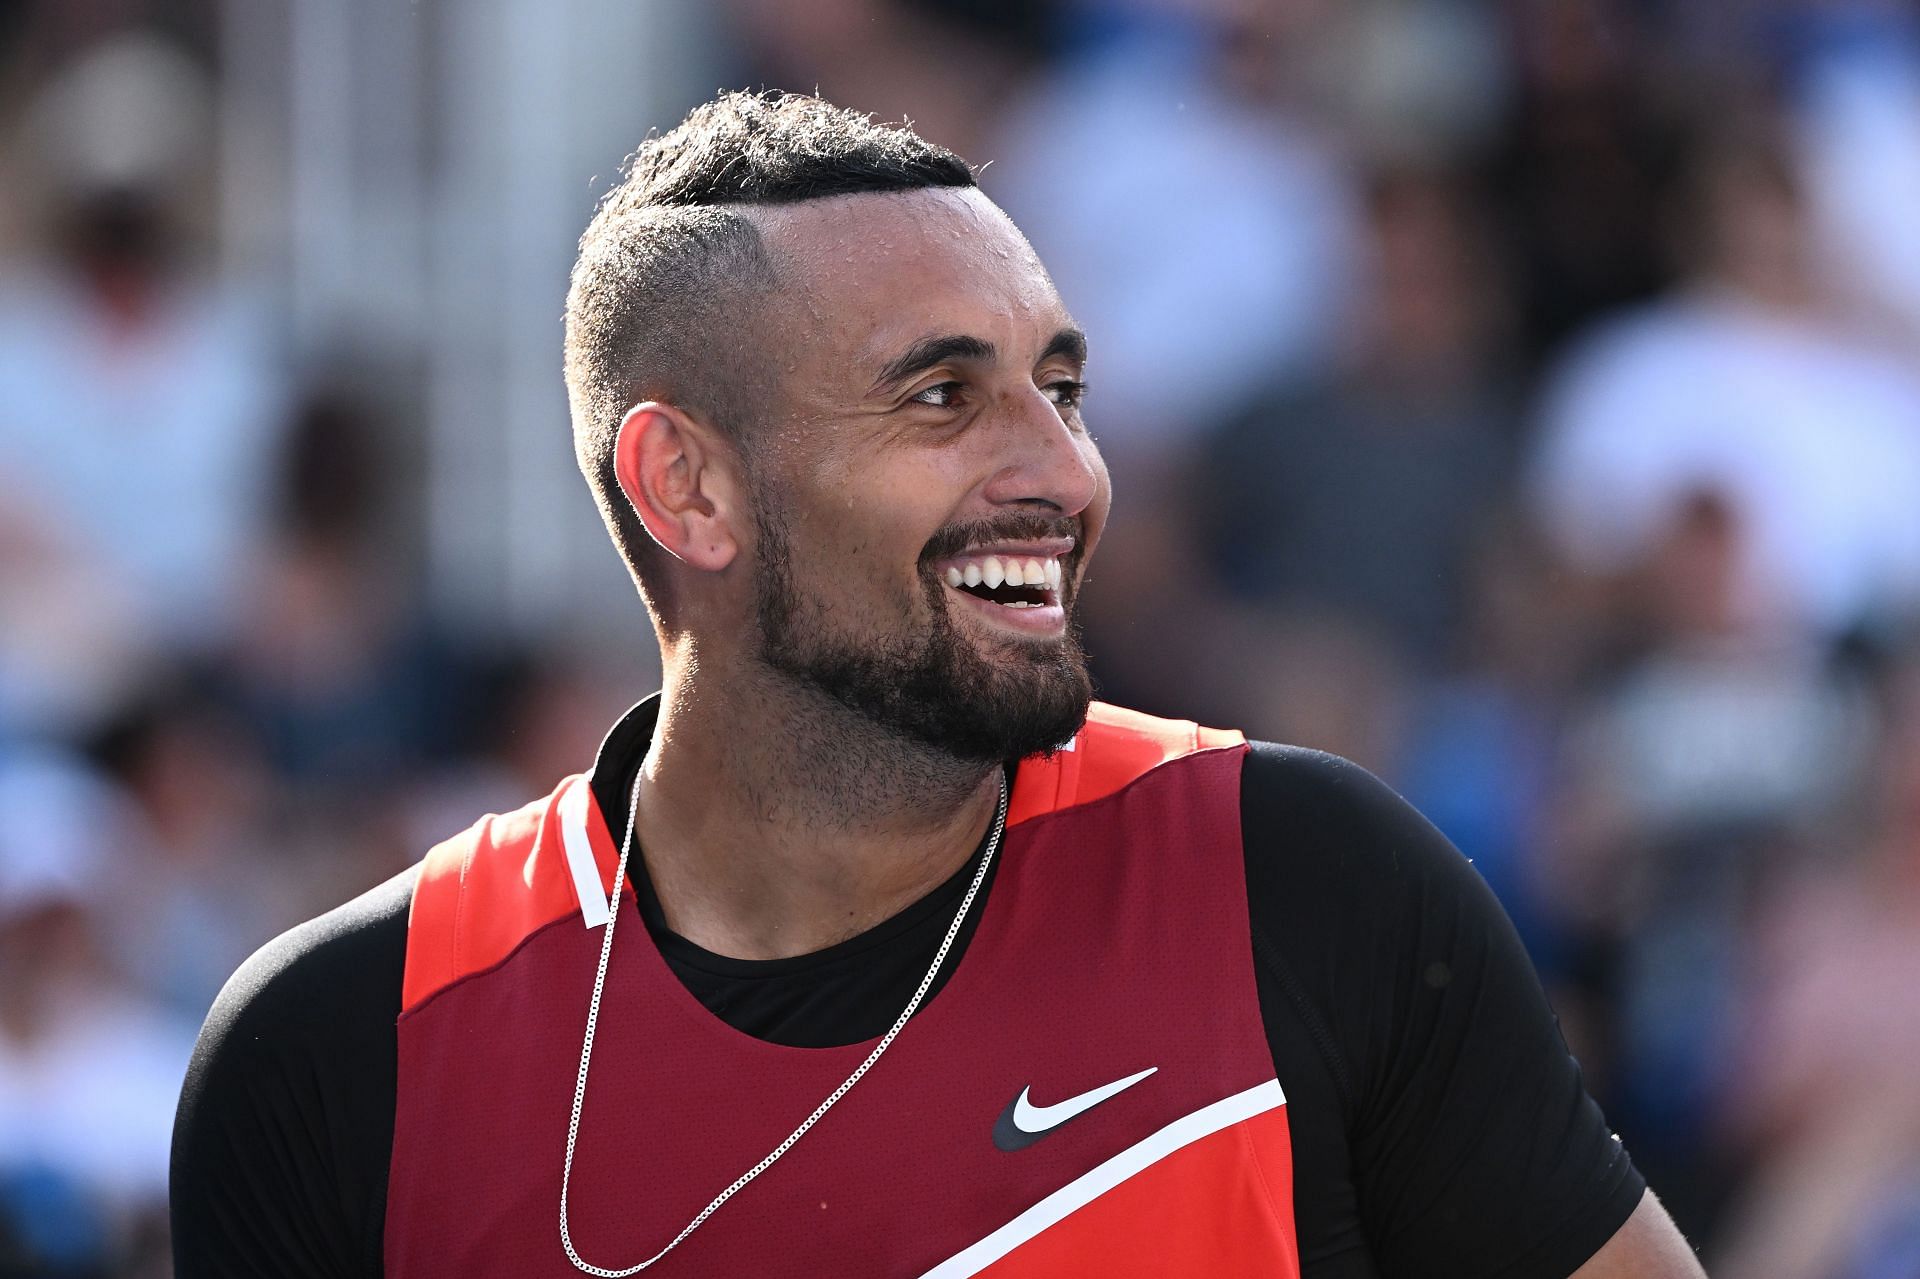 Nick Kyrgios is into his first Grand Slam final.